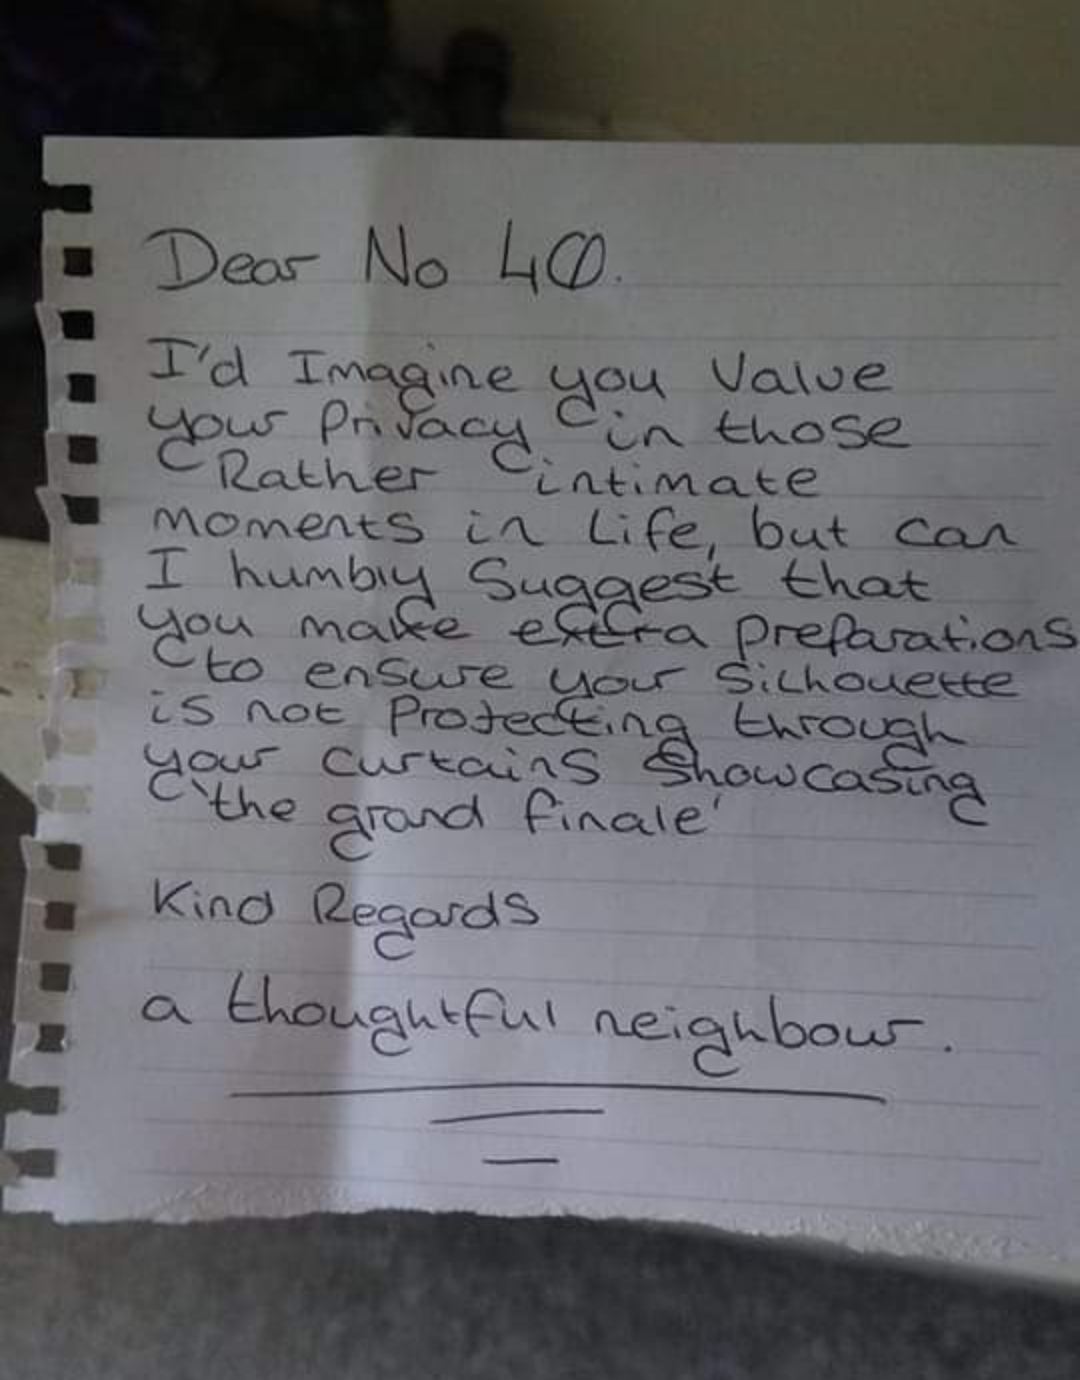 My friend got this concerned note through her letterbox this morning